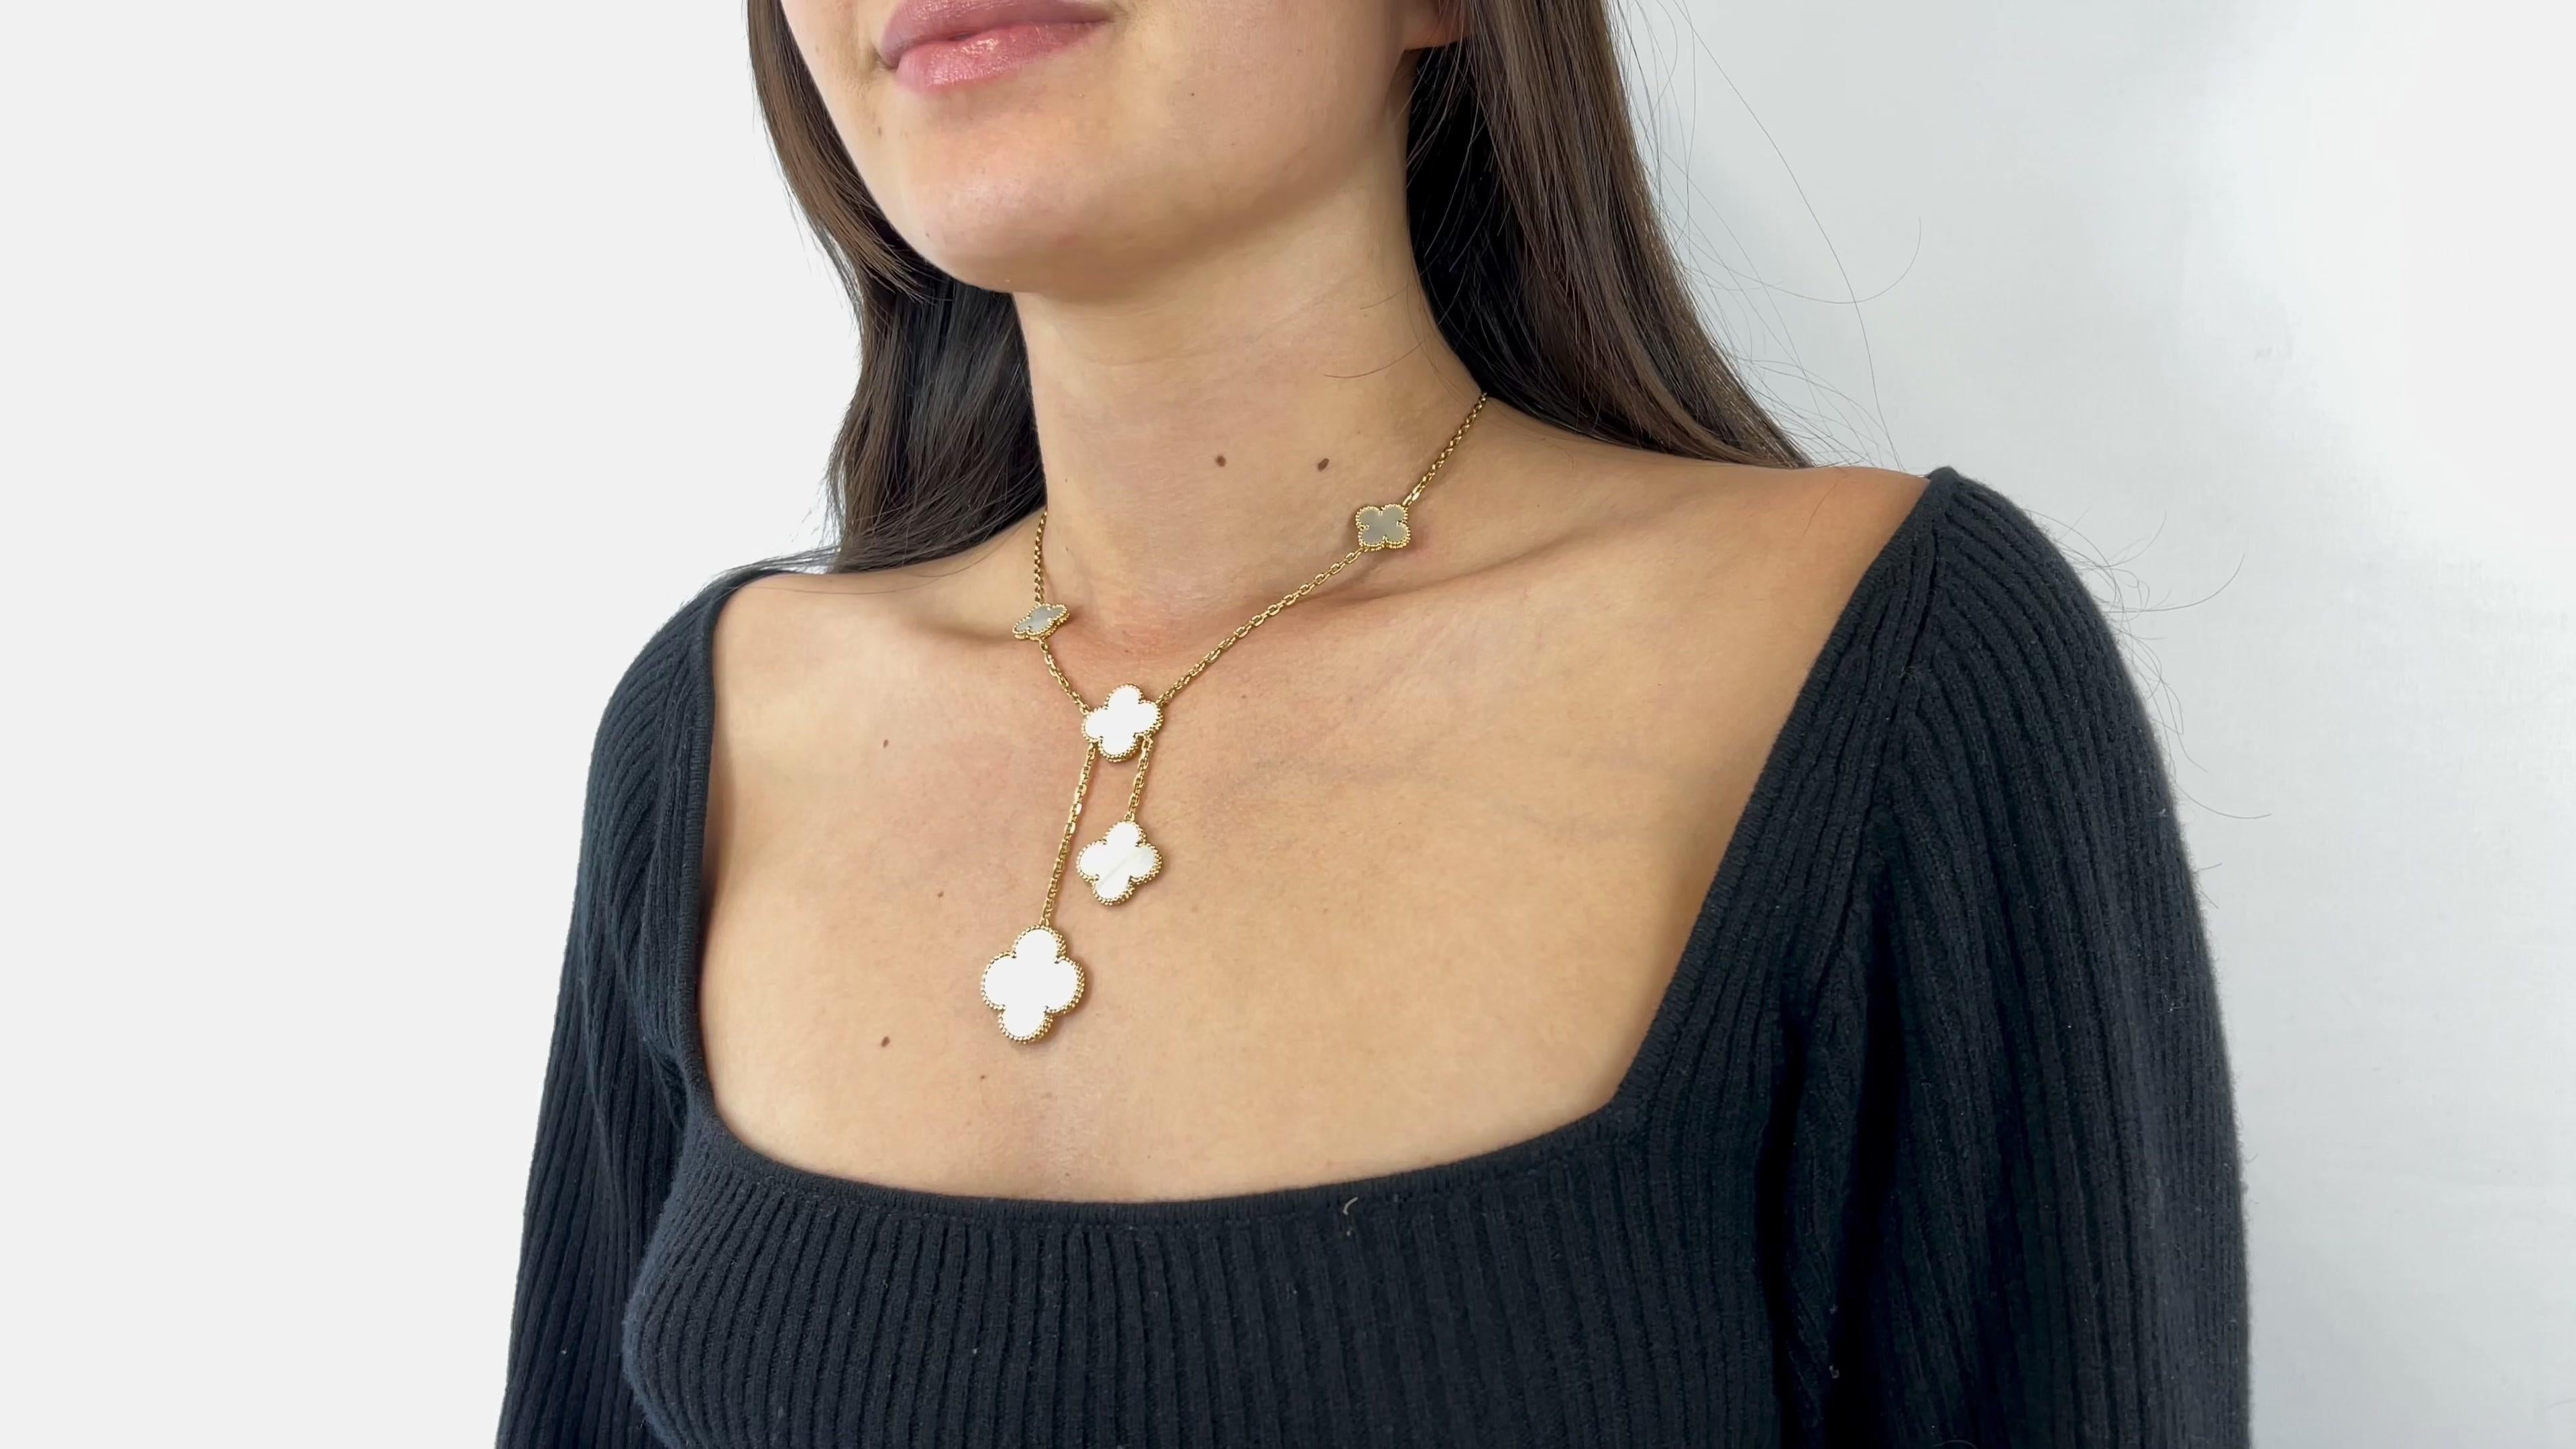 One Van Cleef and Arpels Magic Alhambra Mother of Pearl 18 Karat Gold Necklace. Featuring polished mother of pearl. Crafted in 18 karat yellow gold signed VCA. Circa 2010s. The necklace measures 15 inches in length. 

About The Piece: The rare